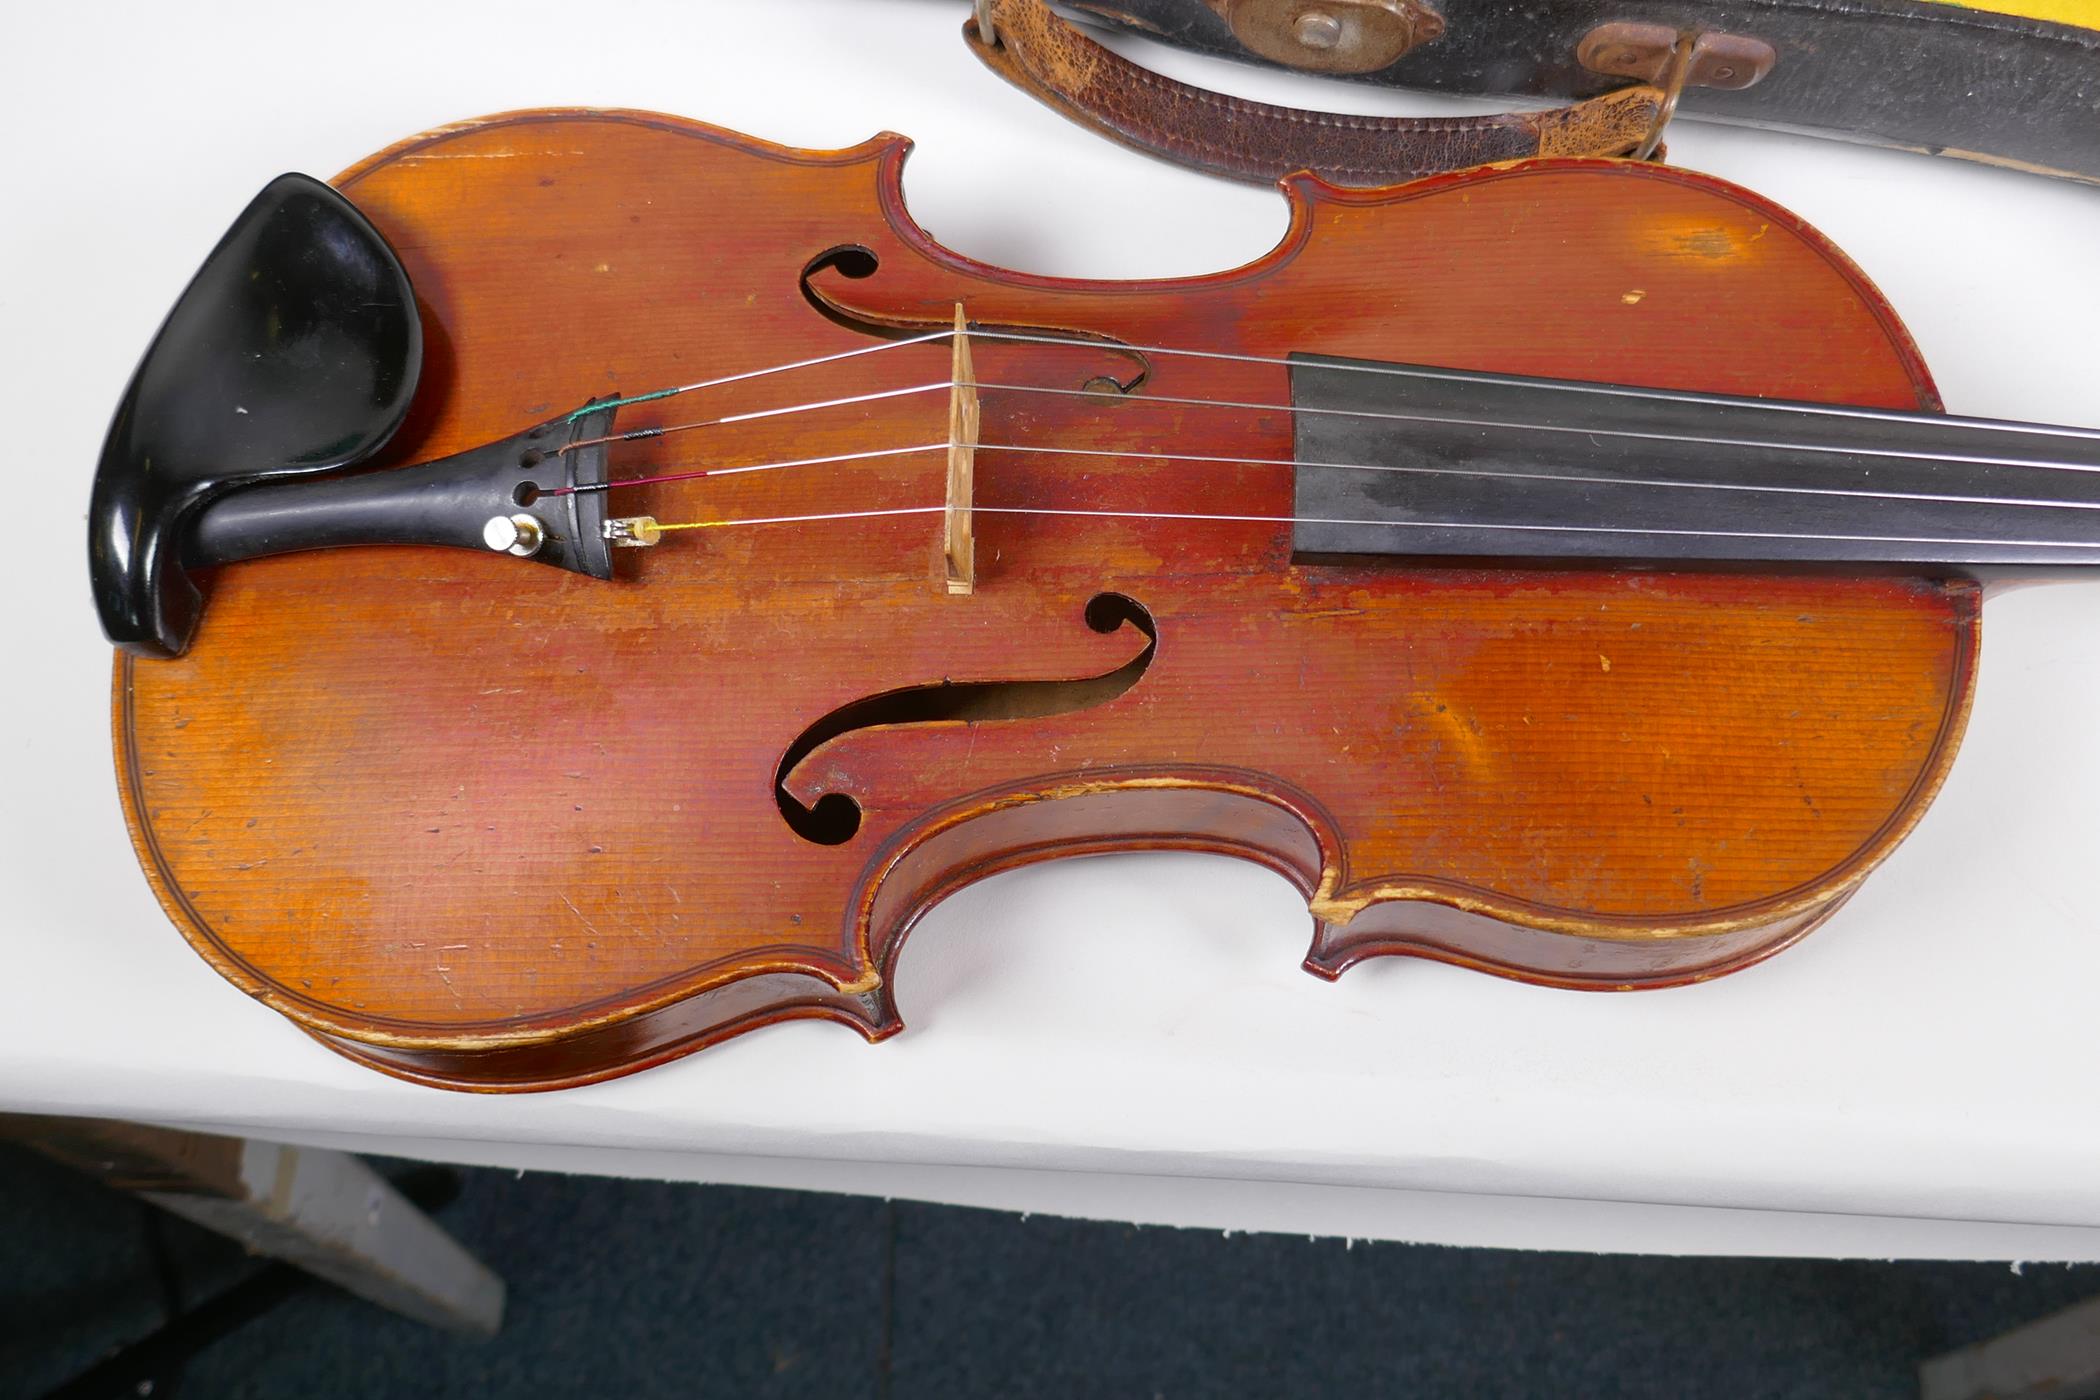 A vintage violin with two piece back and ebony pegs, with a bow and hard carry case, 60cm long - Image 6 of 7